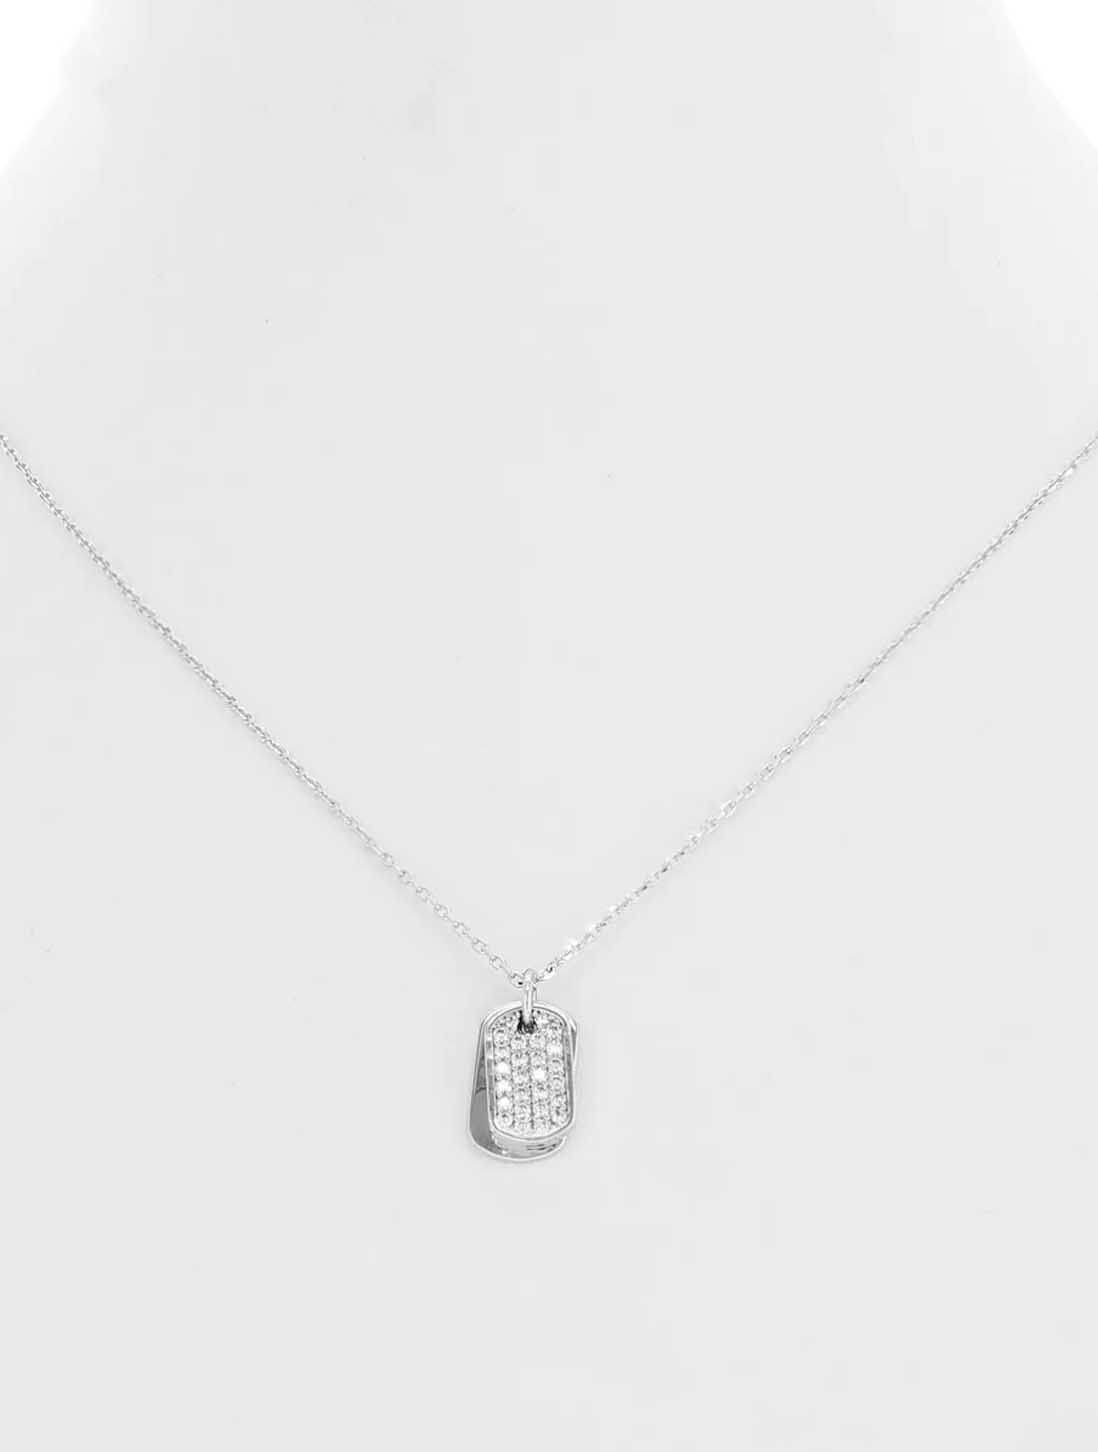 JAYNE Dog Tag Necklace in Silver